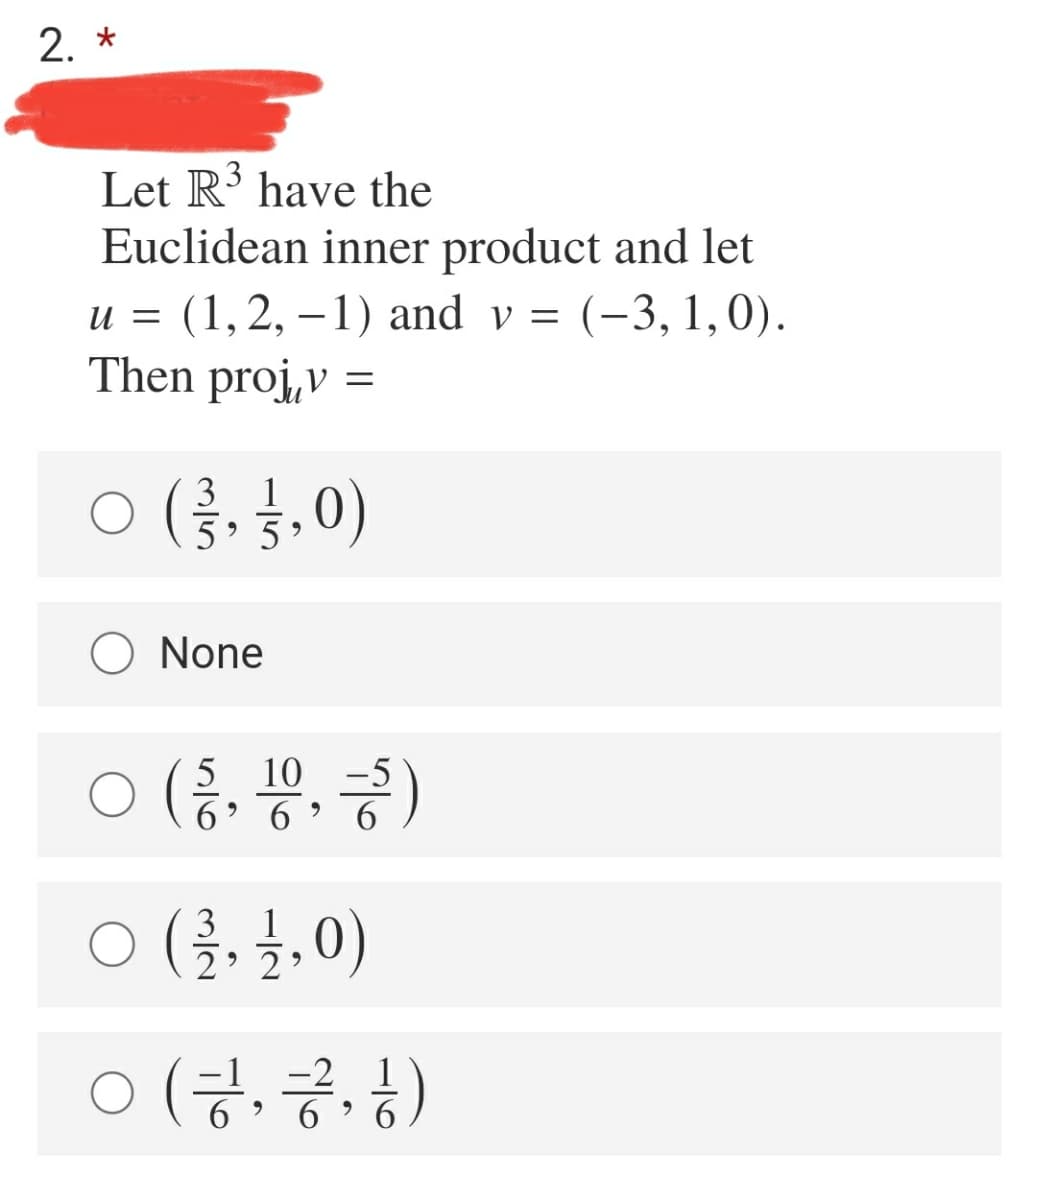 2. *
Let R' have the
Euclidean inner product and let
u = (1,2, –1) and v = (-3, 1,0).
Then proj,v =
ㅇ (용,,0)
3
None
ㅇ (, 용, 종)
10
6.
6.
ㅇ (금, 불,0)
3
2 2
ㅇ (긍, 긍, )
-2 1
